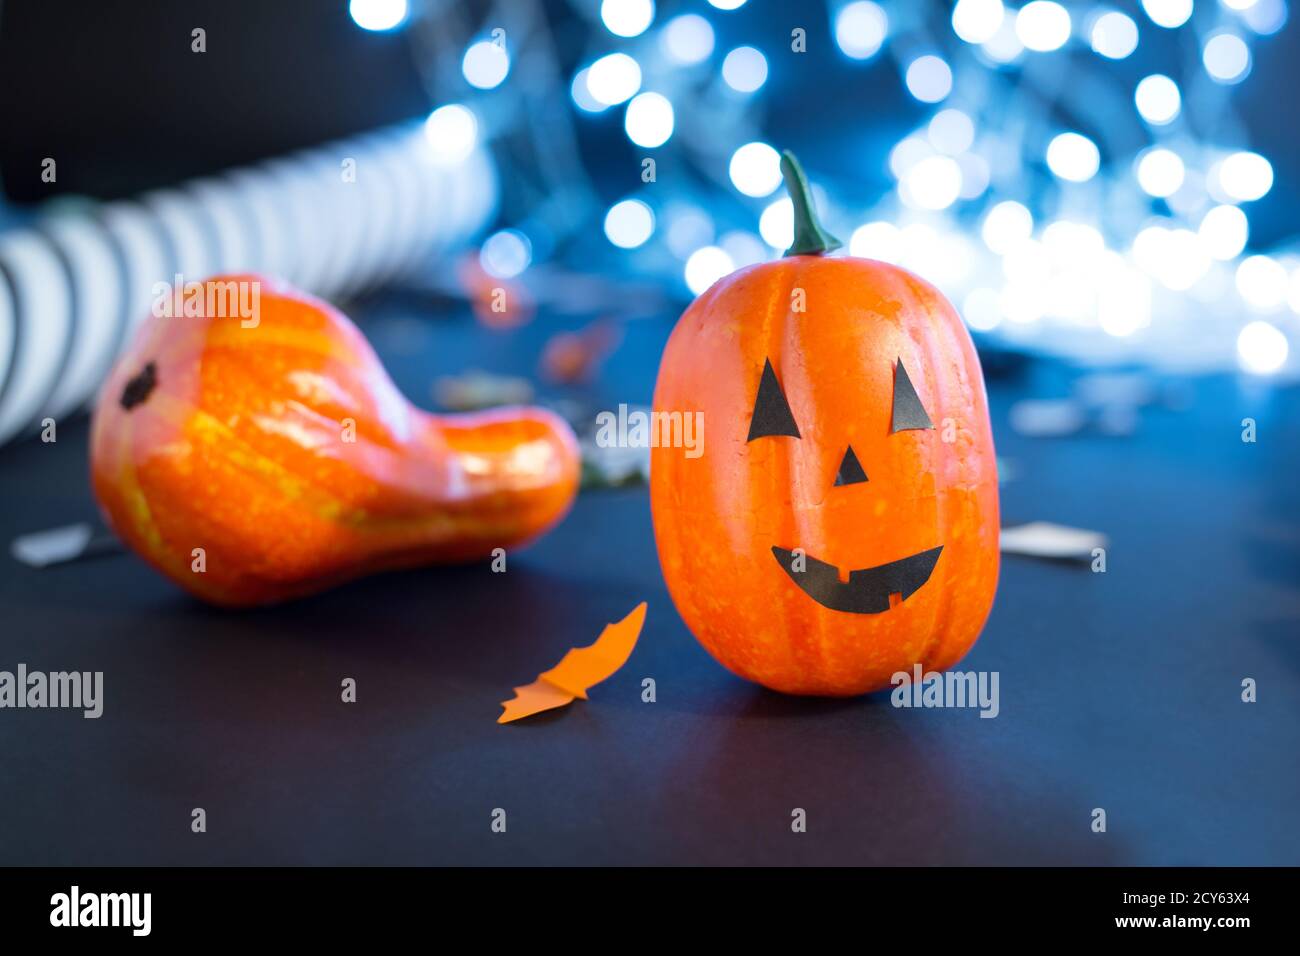 jack-o'-lantern with paper bats, pumpkin ribbons, confetti on black background with lights. Halloween party invitation, celebration. Halloween Stock Photo